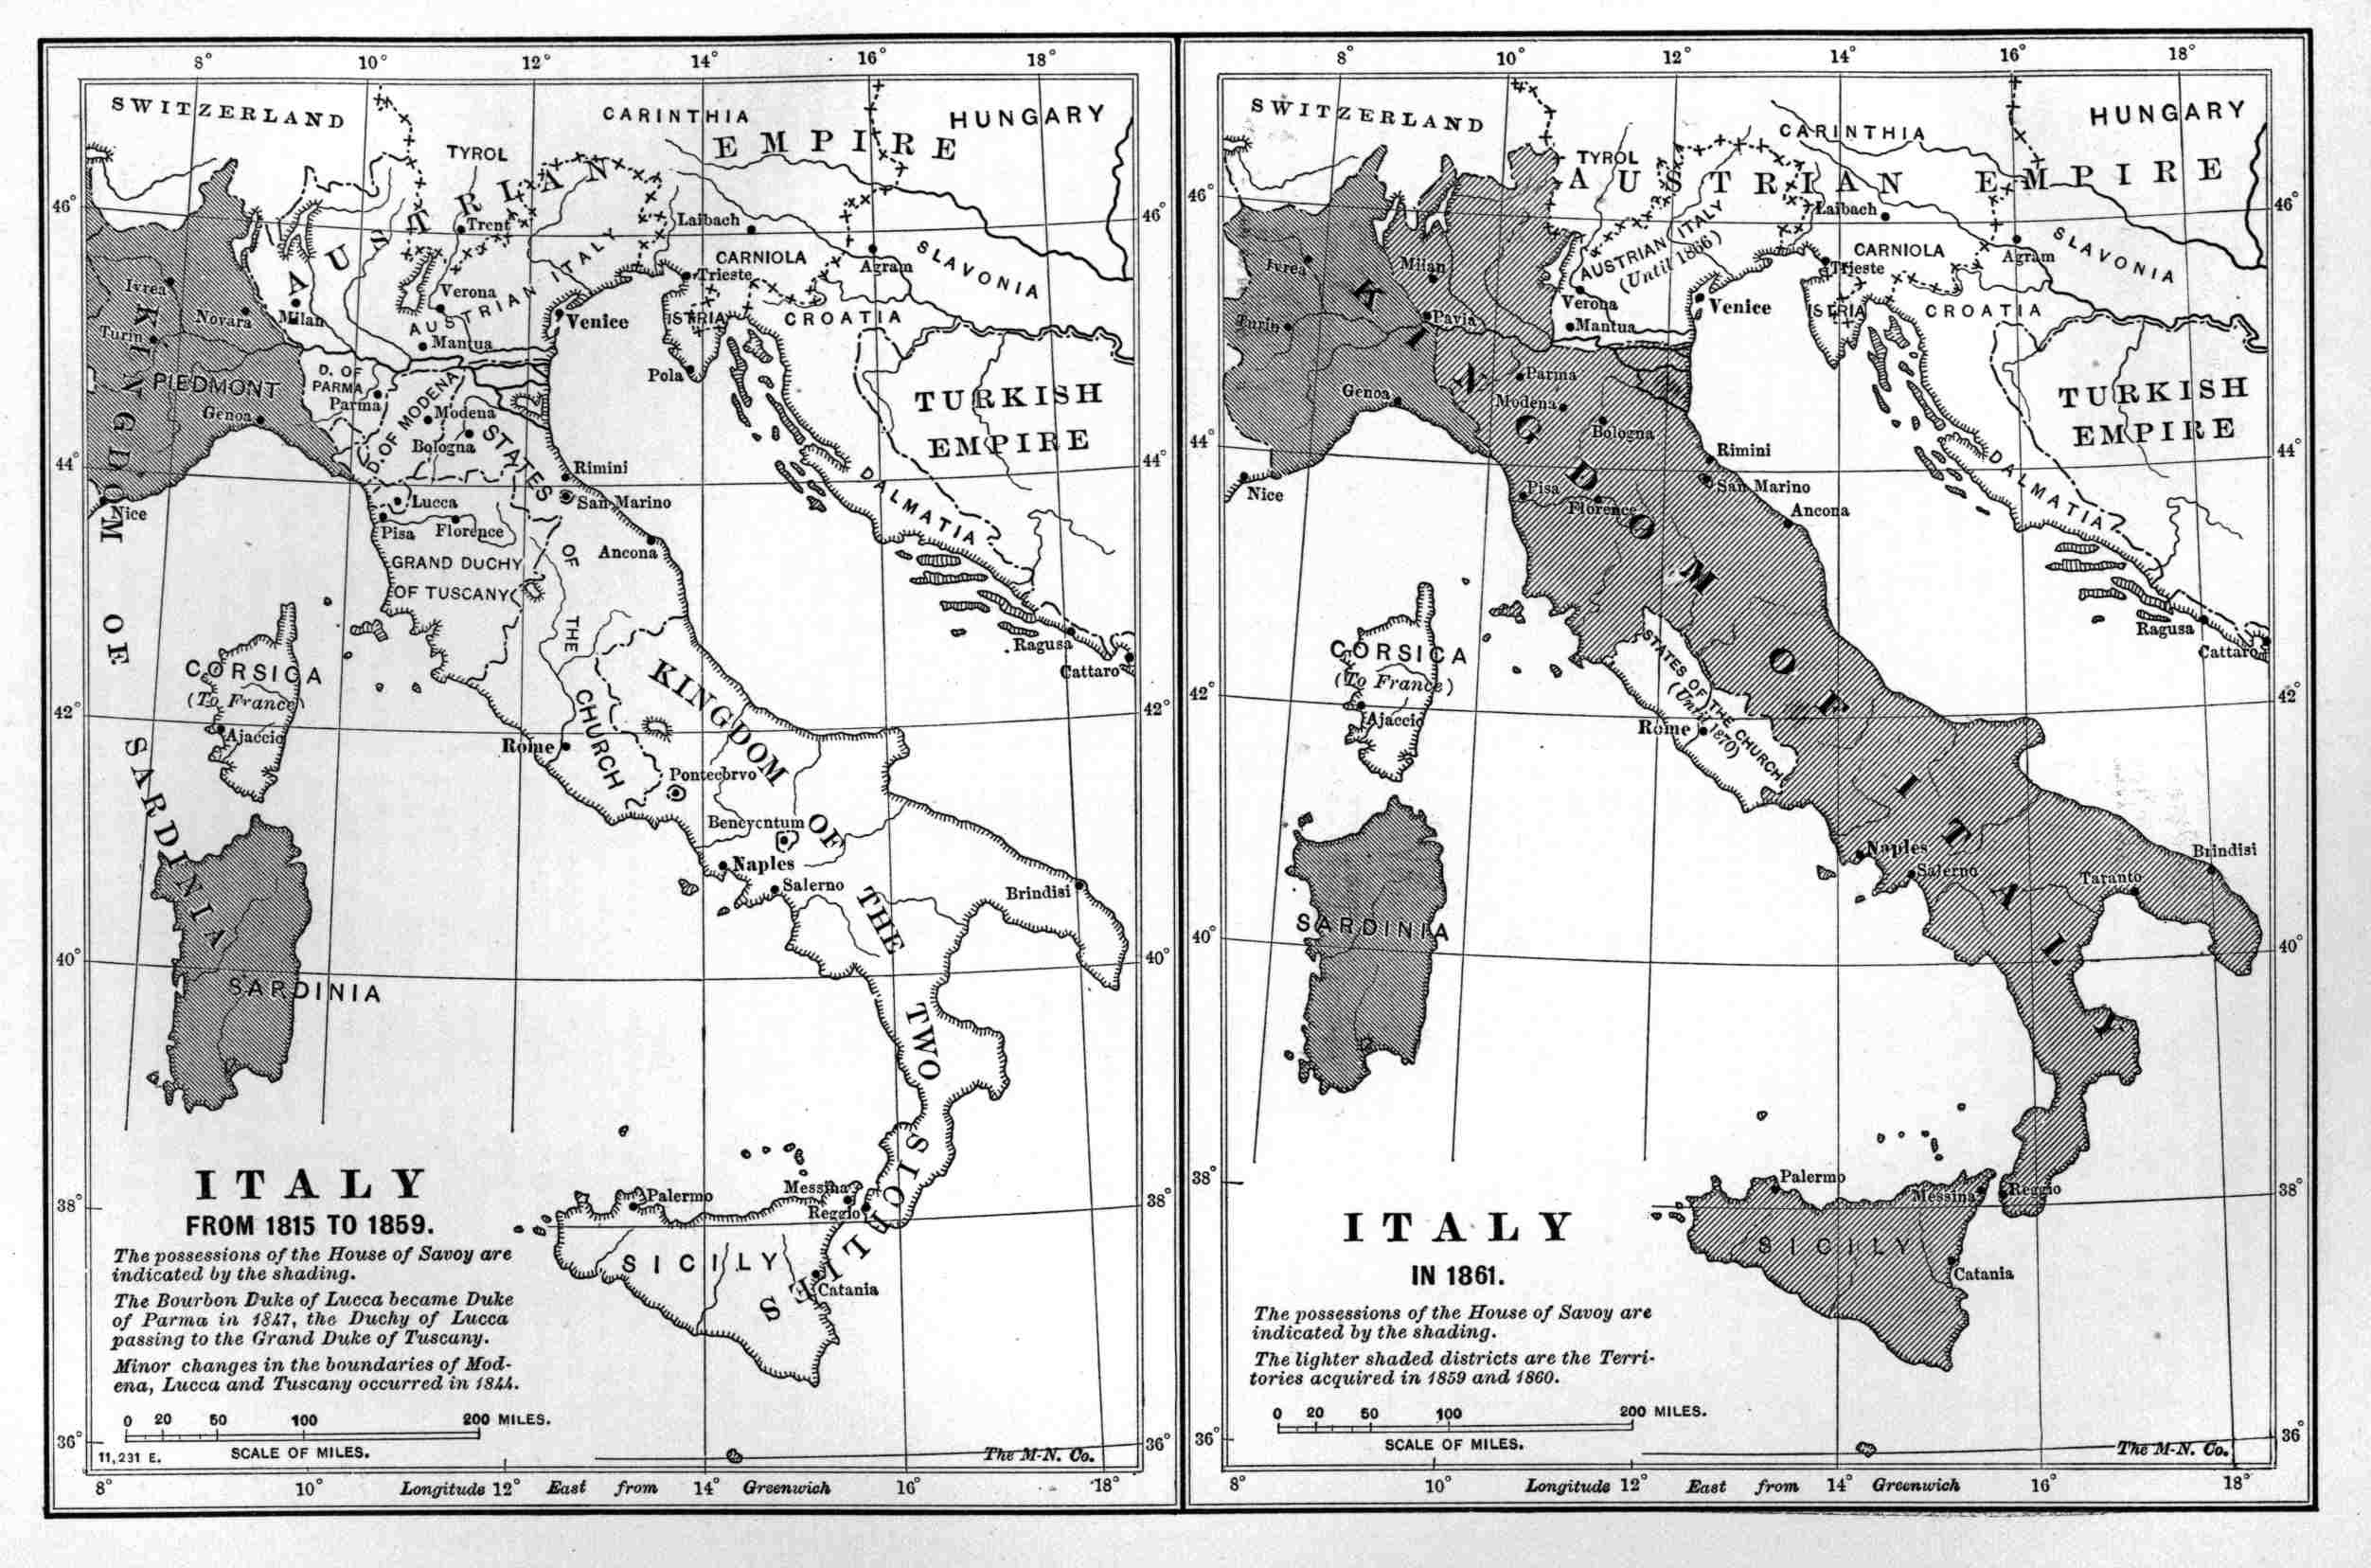 Two maps of Italy,
A. D. 1815 to 1859, and 1861.